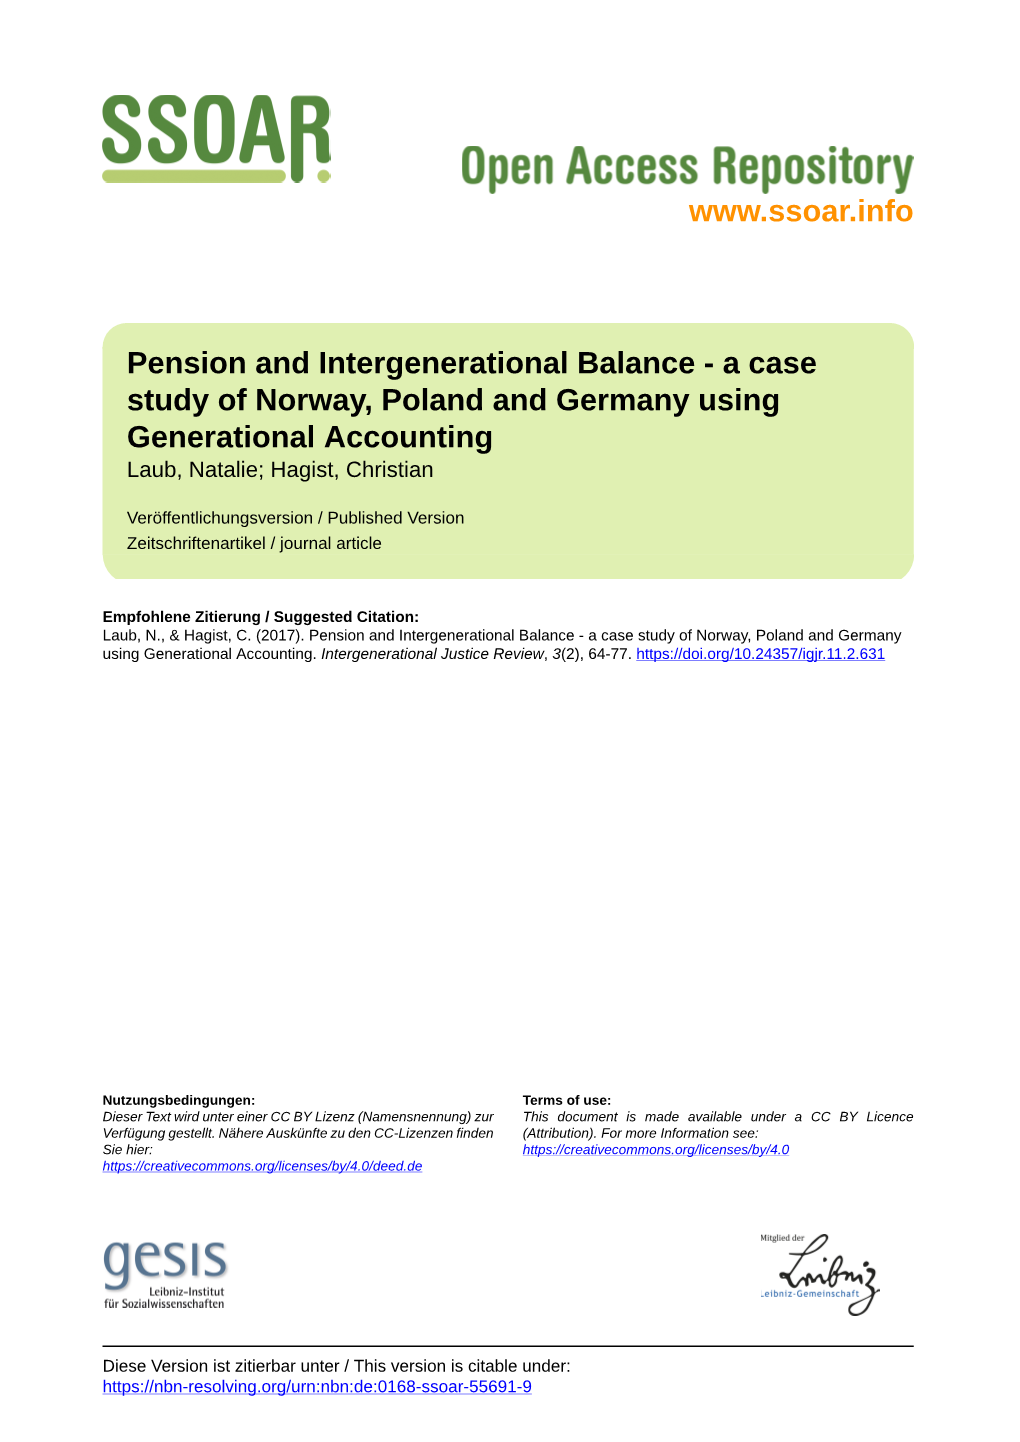 Pension and Intergenerational Balance - a Case Study of Norway, Poland and Germany Using Generational Accounting Laub, Natalie; Hagist, Christian